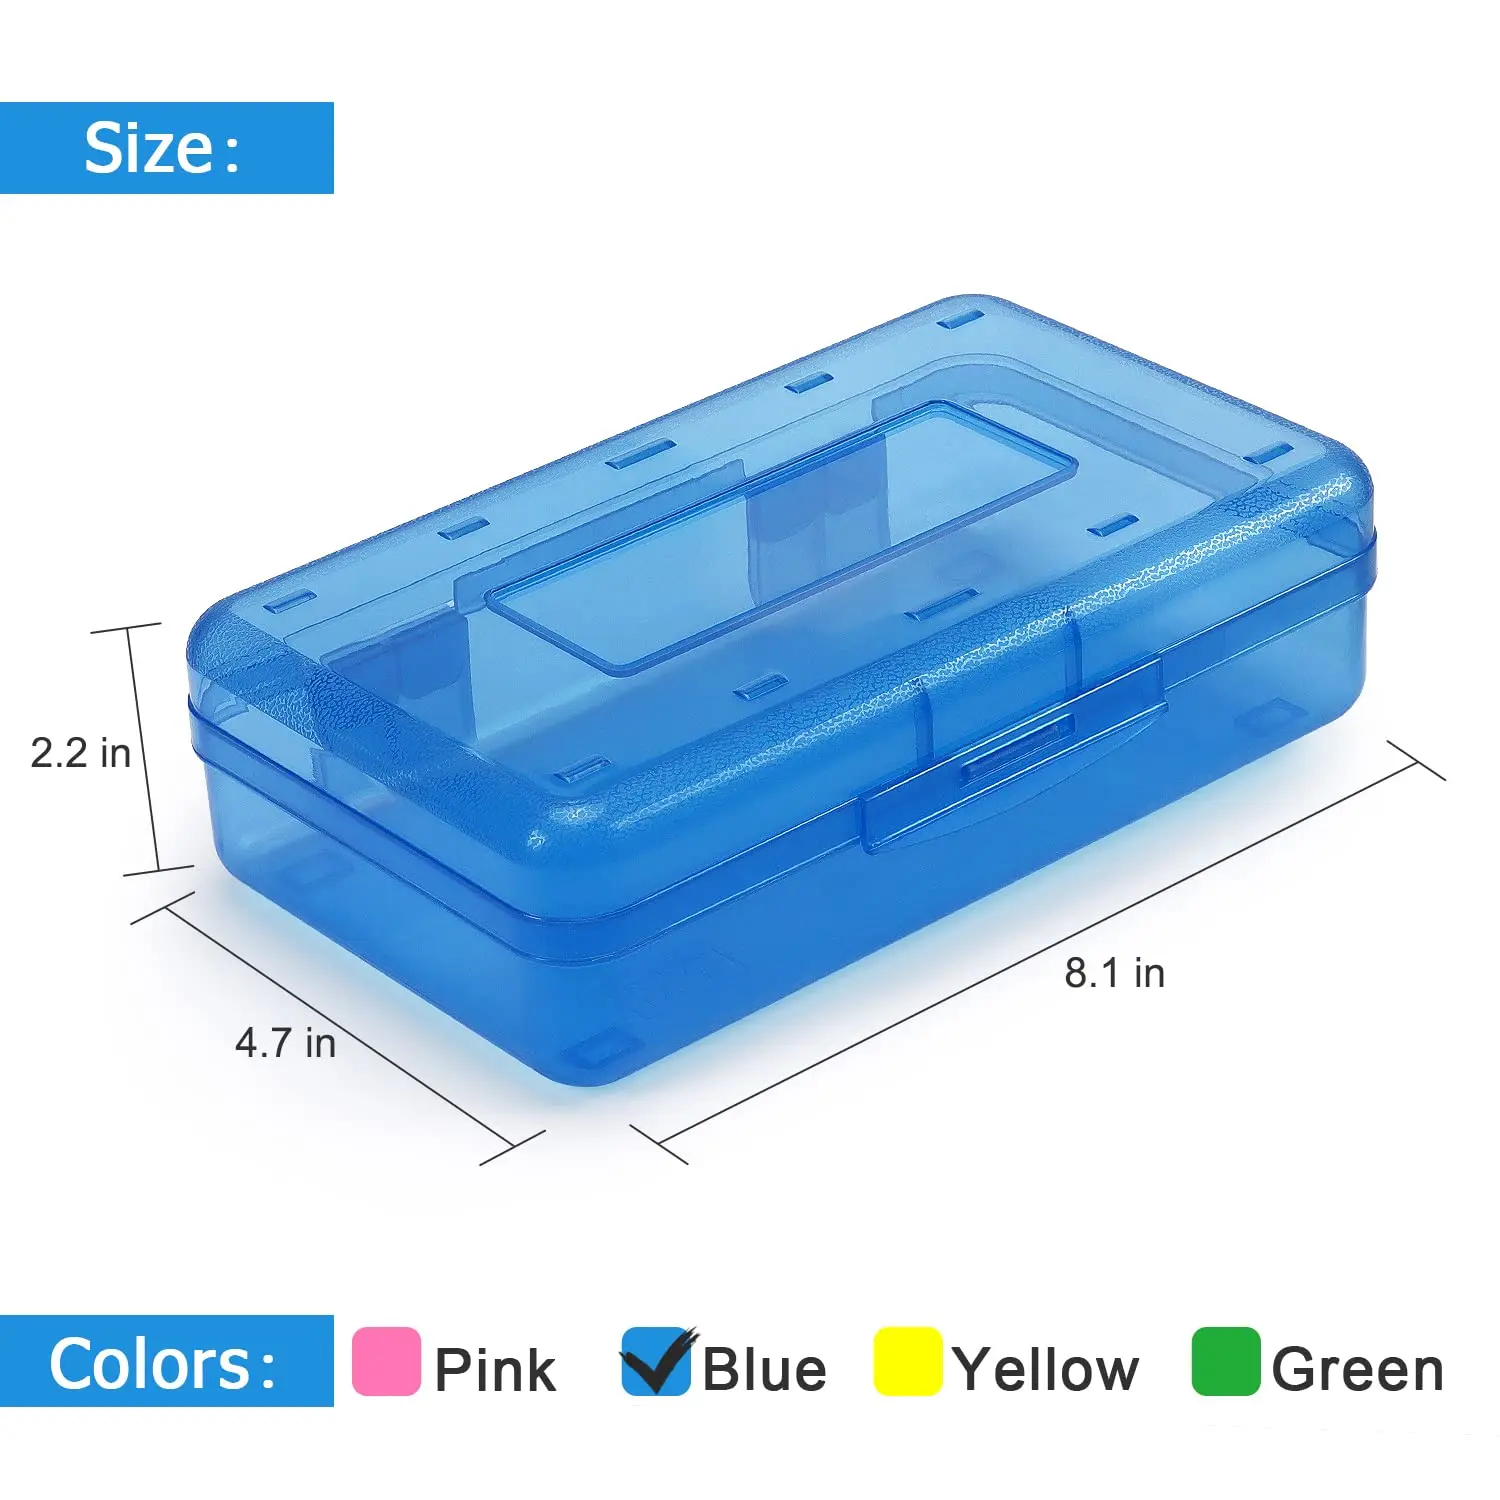 https://ae01.alicdn.com/kf/Sd2fad5db189e4d679ad3367a7afb0baag/Plastic-Pencil-Case-Large-Capacity-Clear-Boxes-with-Snap-Tight-Lid-Children-s-Cute-Sketch-Container.jpg